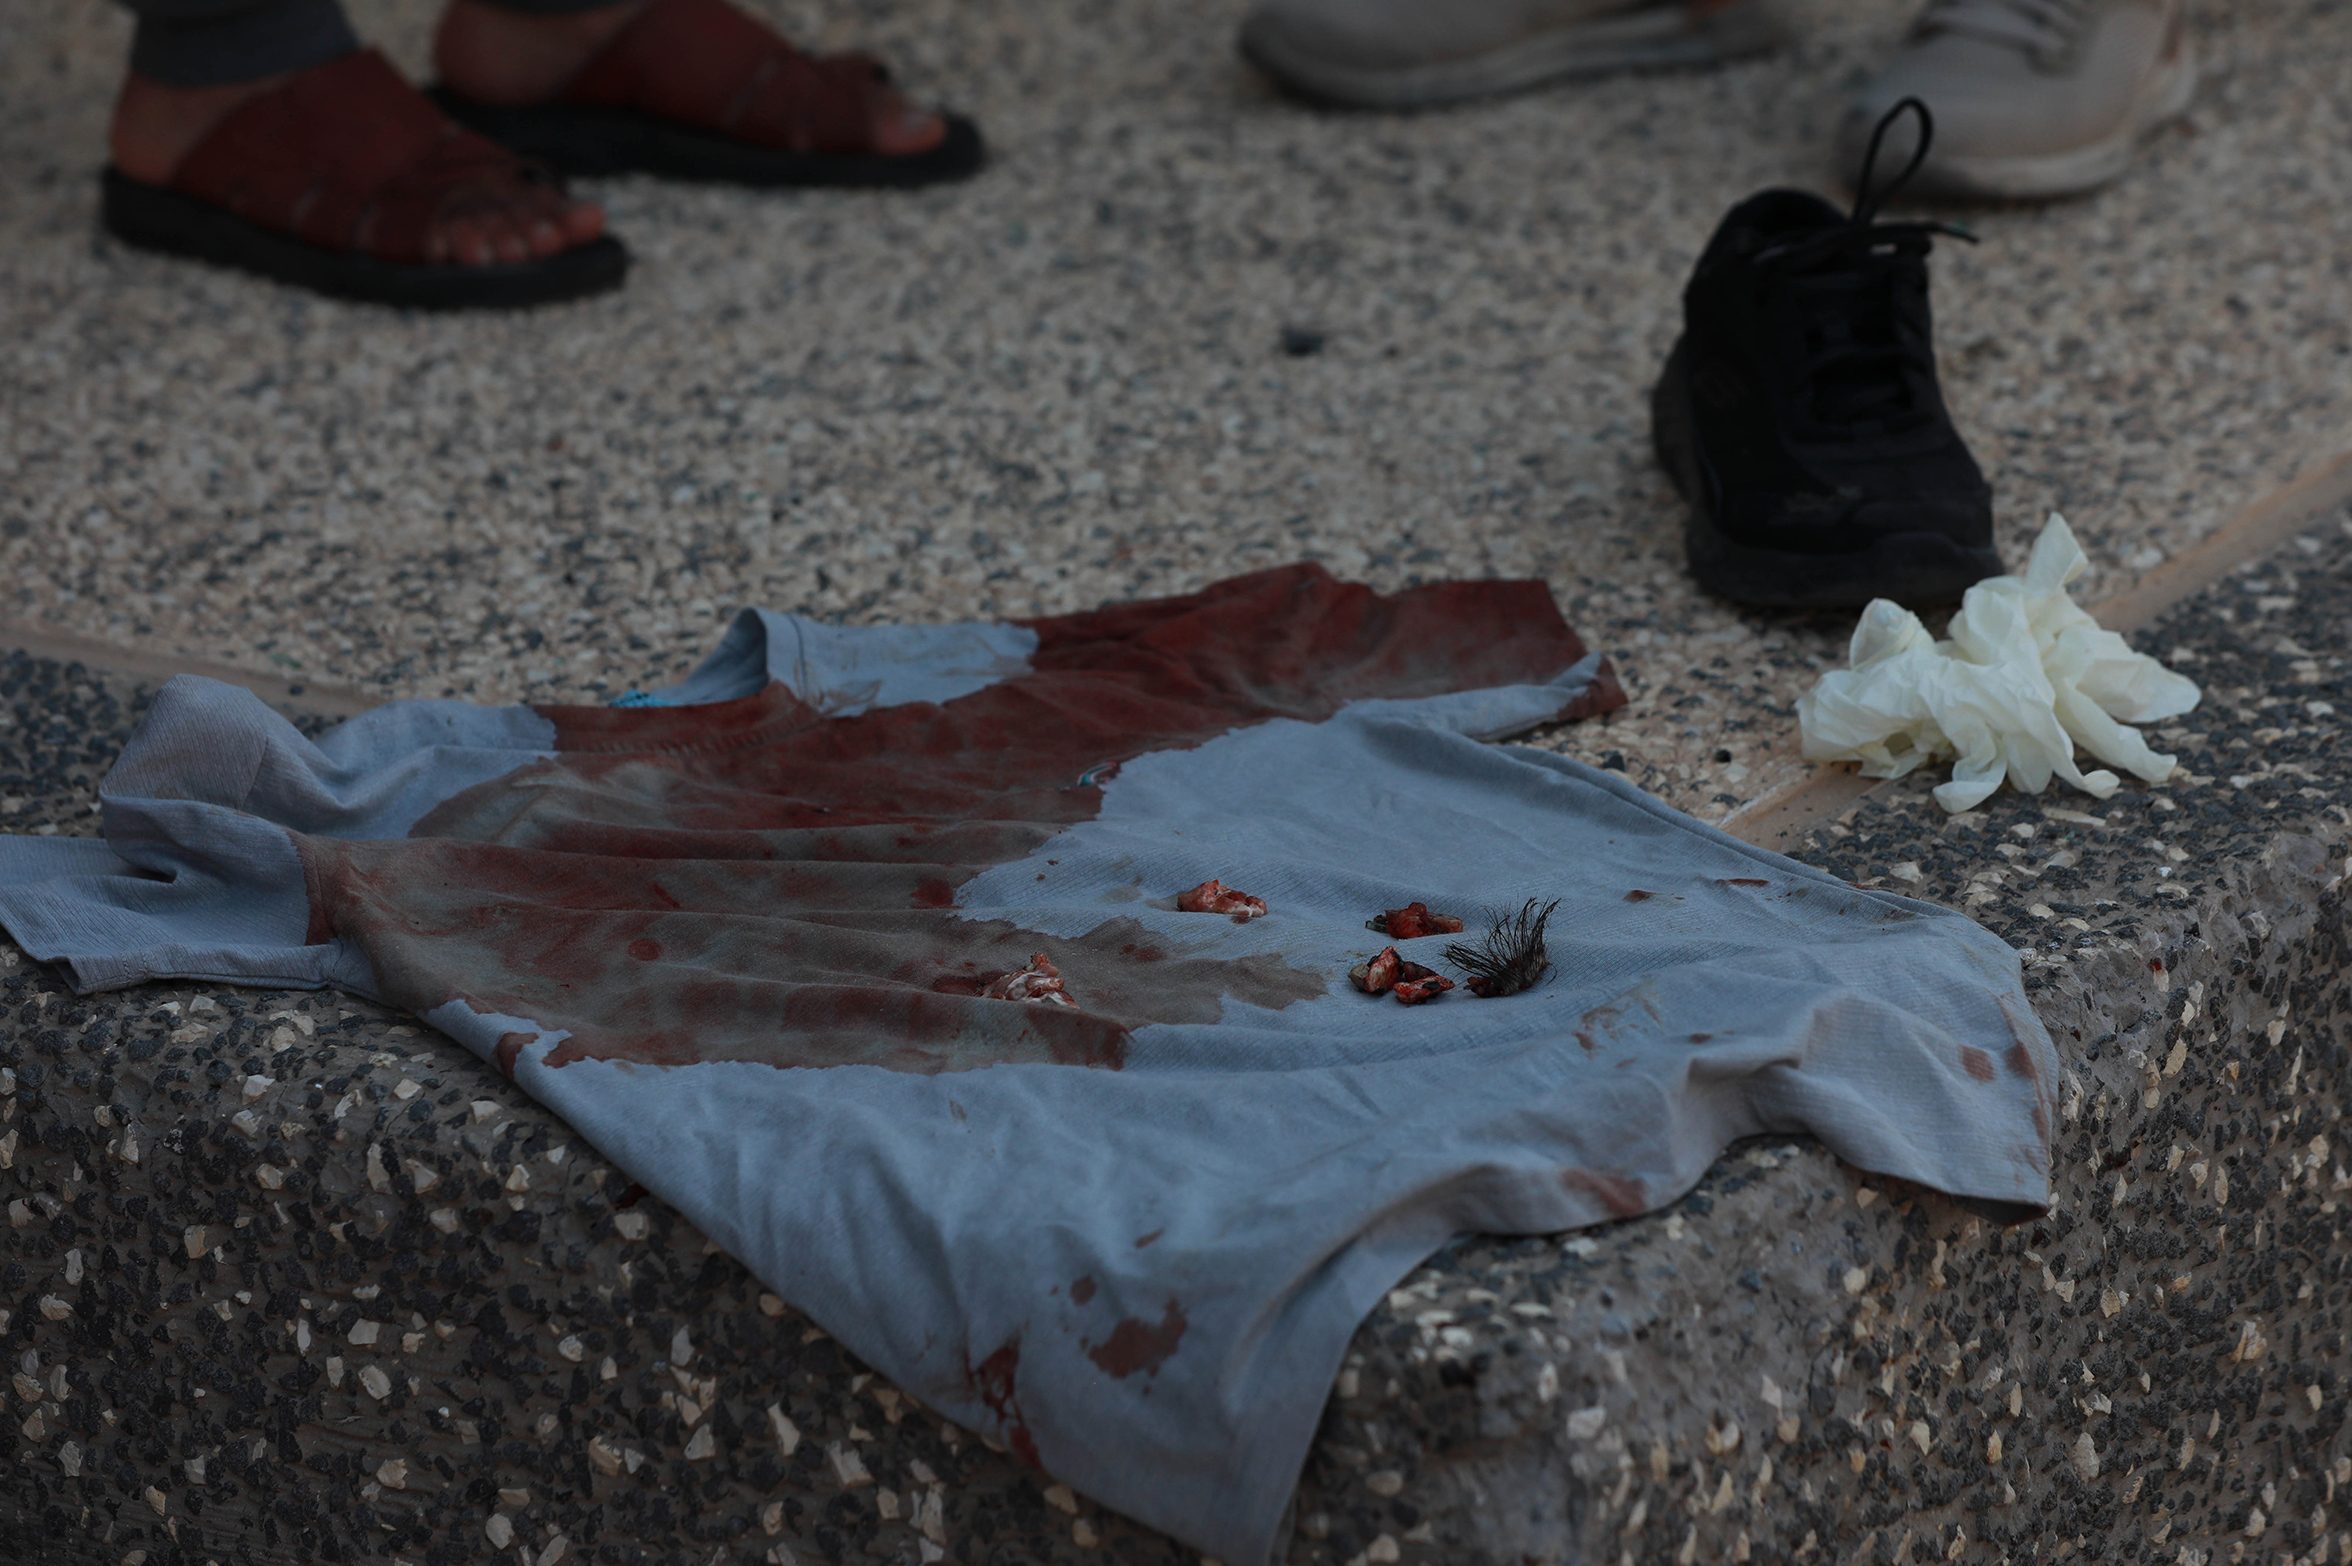 A bloodied shirt can be seen at a scene where 3 Palestinian were killed during a clash with Israeli forces near Mount Al-Tur in the West Bank city of Nablus, on July 25.